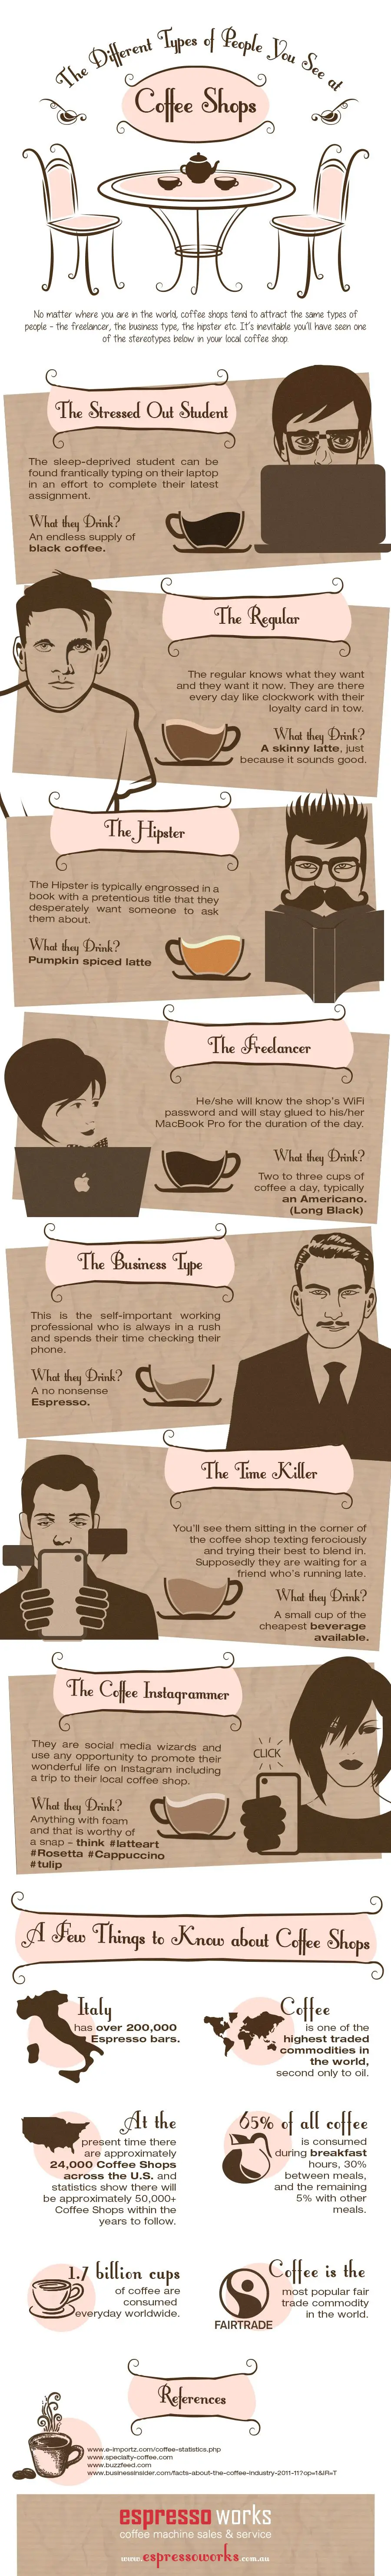 Different Types at Coffee Shops - Infographic.jpg